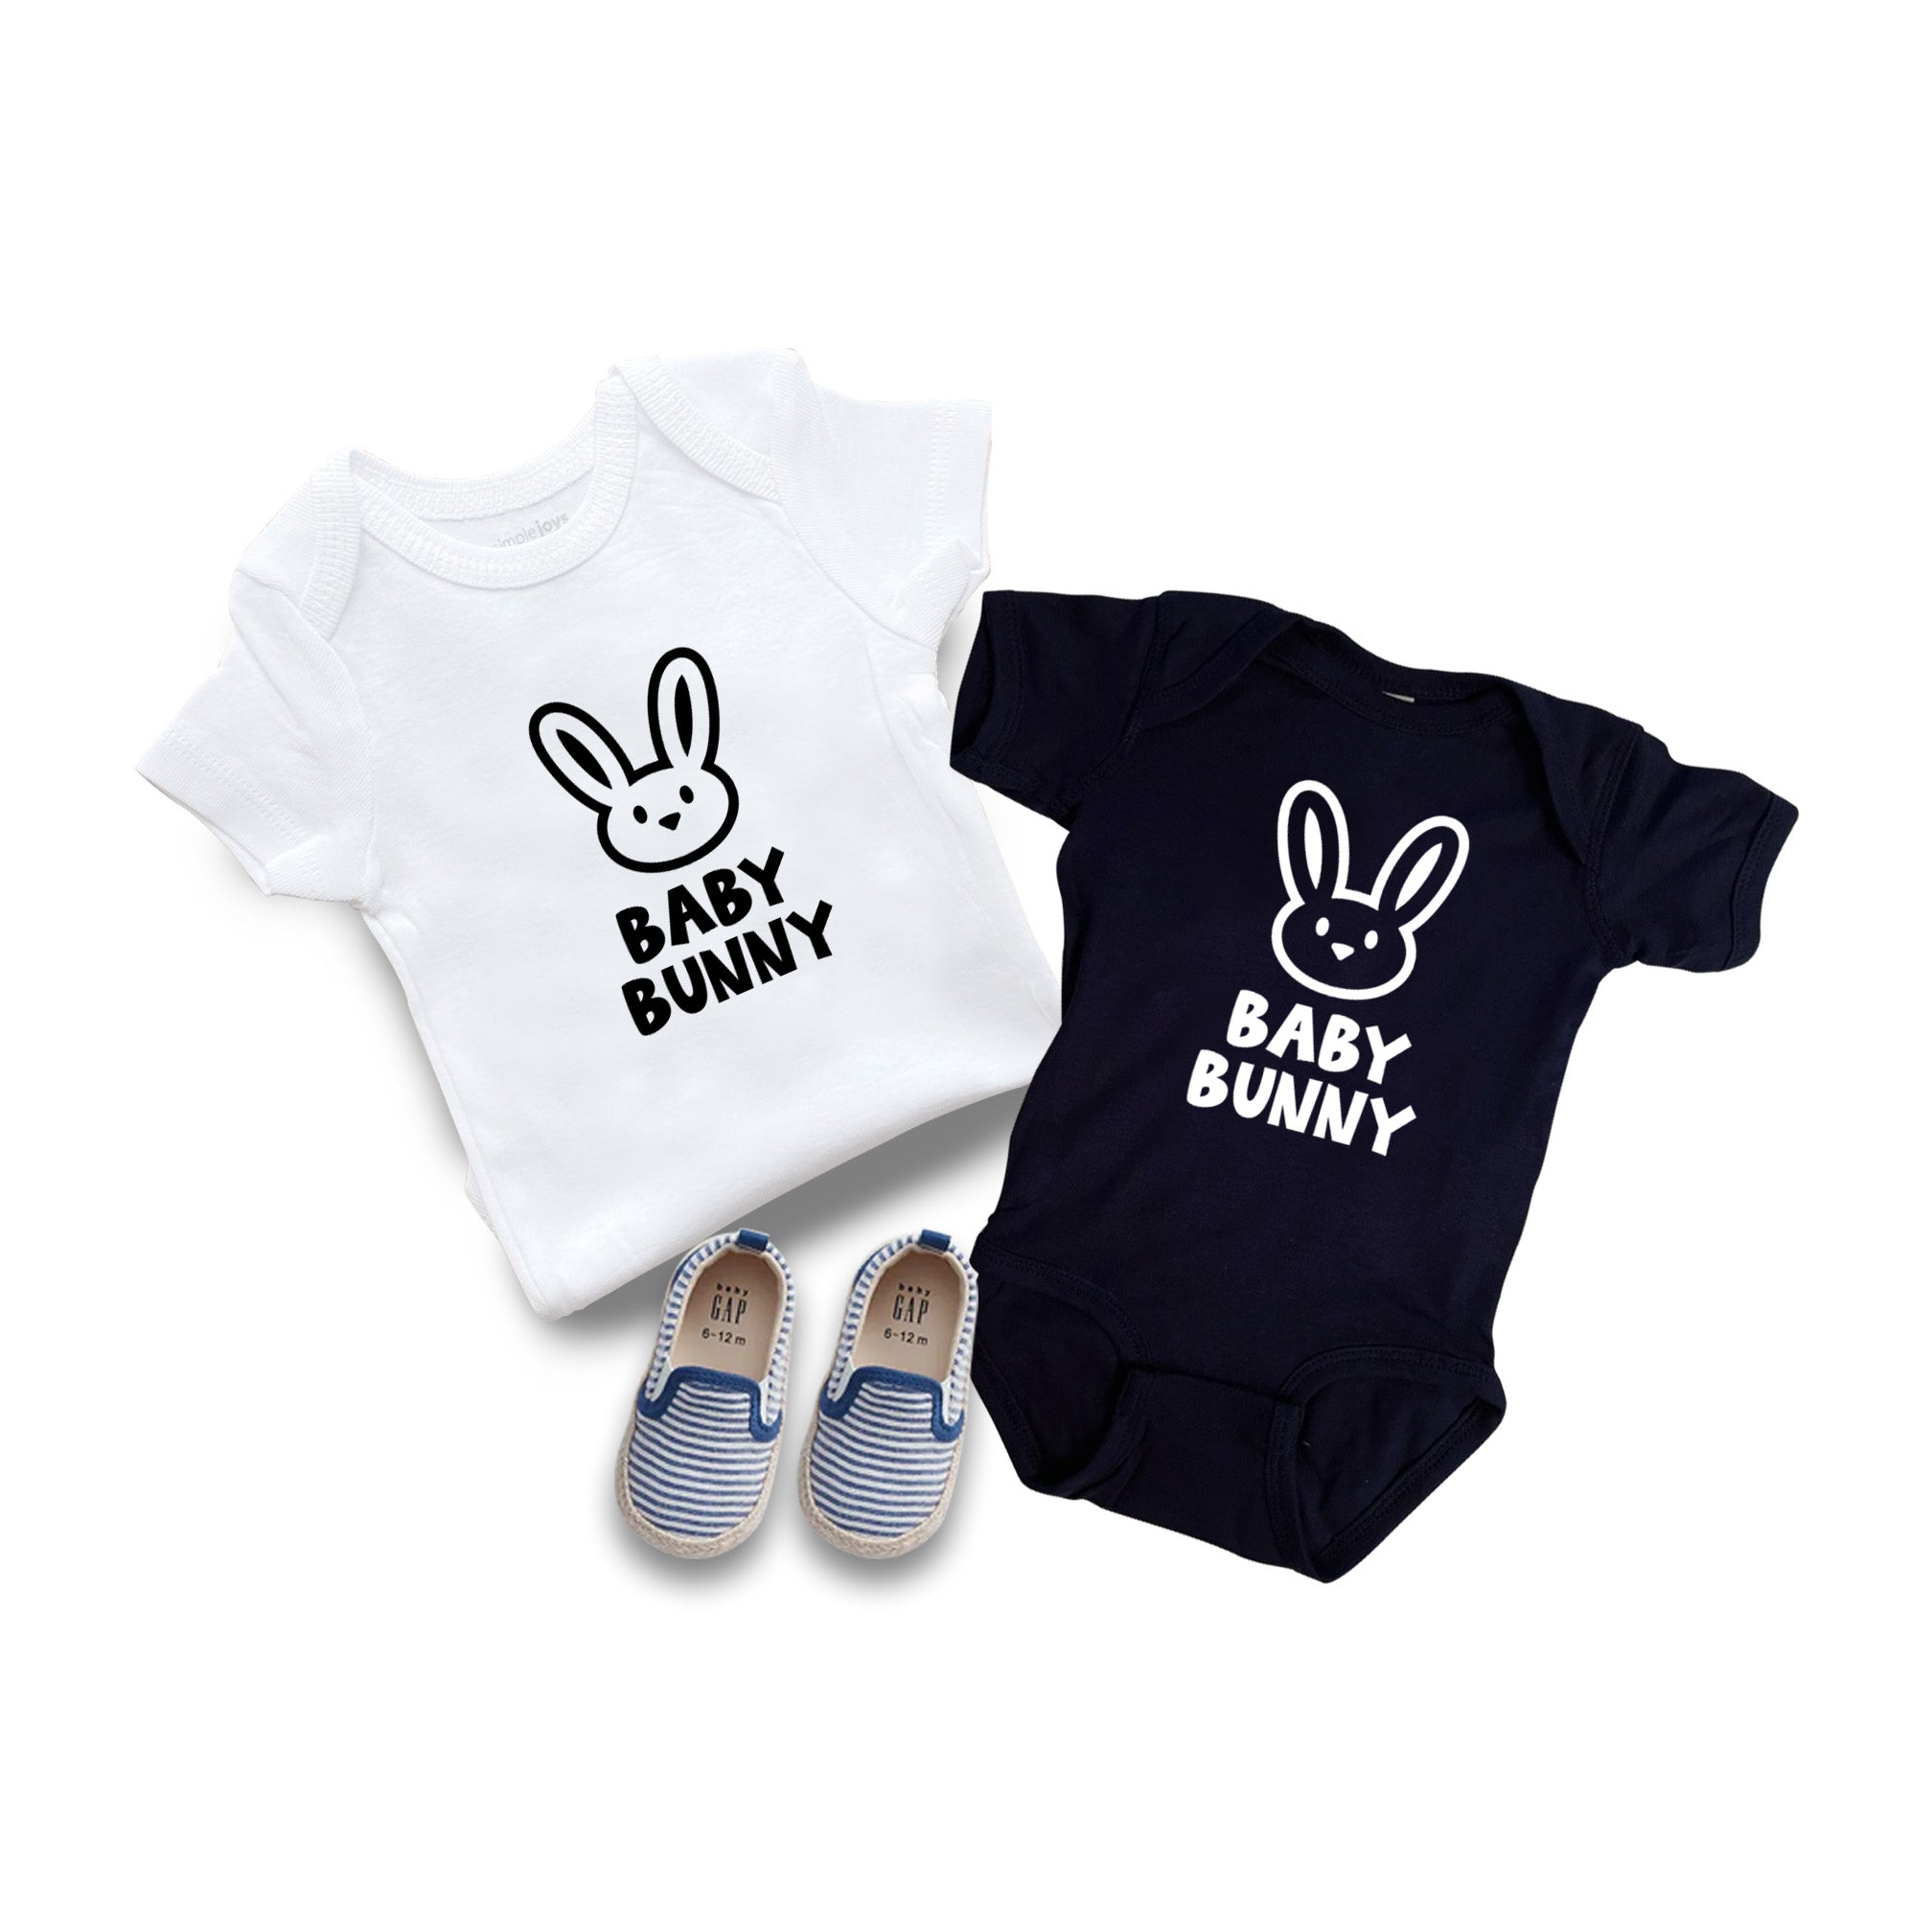 Mommy Bunny and Baby Bunny Tees